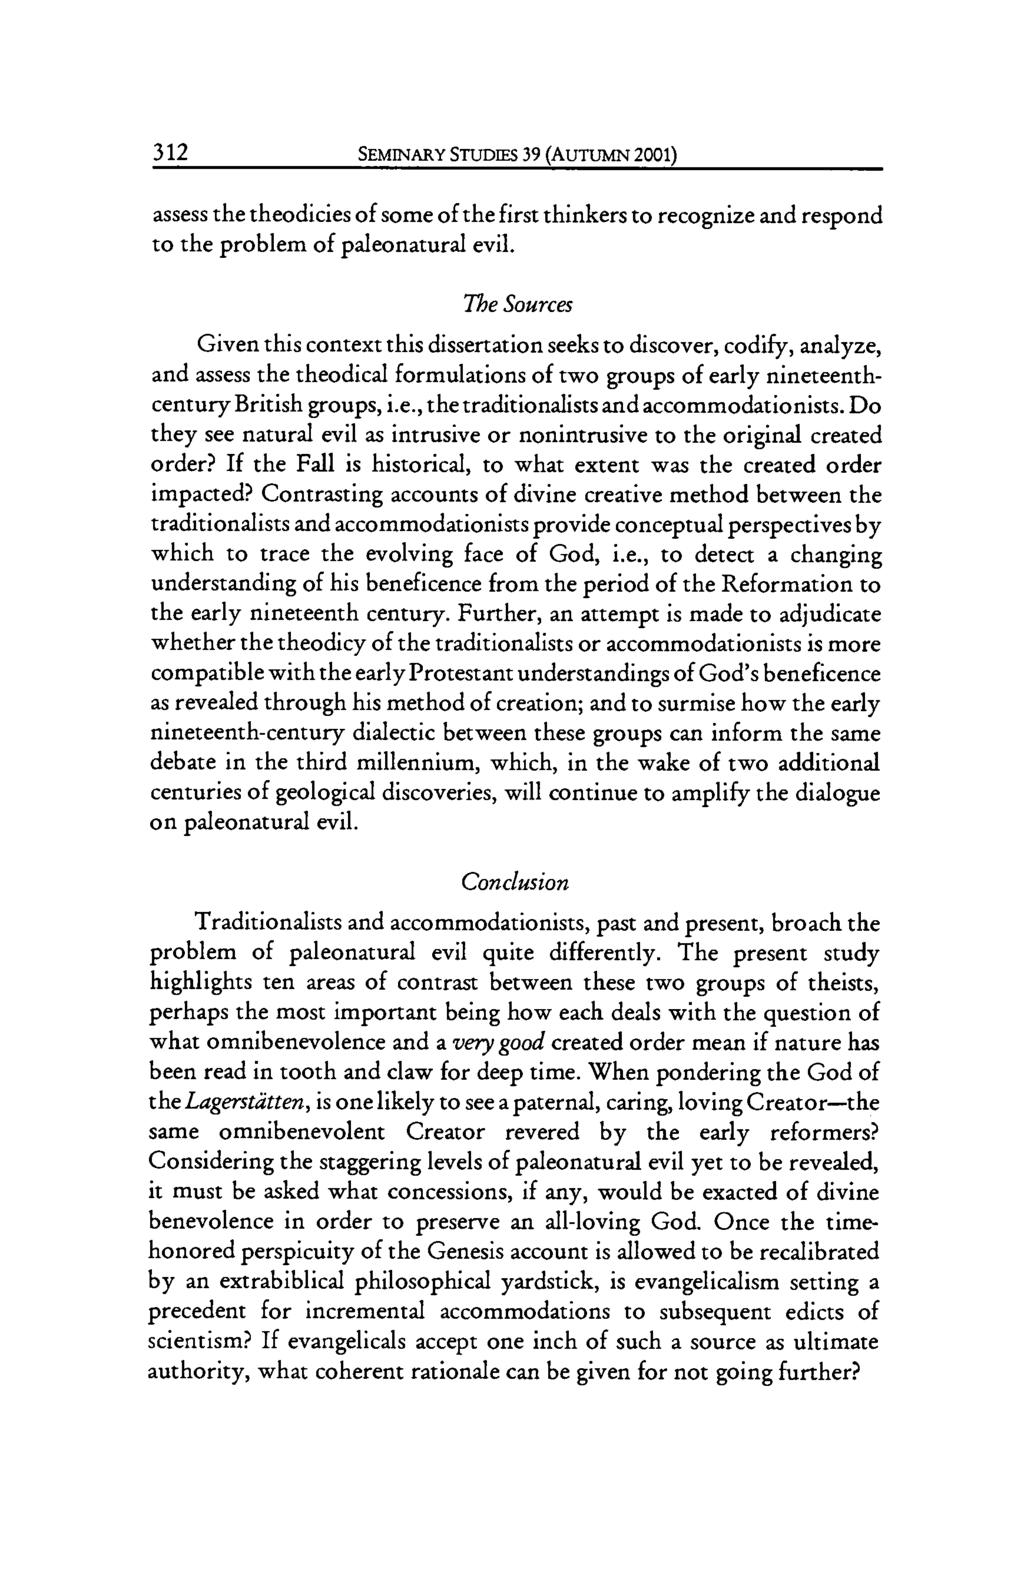 312 SEMINARY STUDIES 39 (AUTUMN 2001) assess the theodicies of some of the first thinkers to recognize and respond to the problem of paleonatural evil.